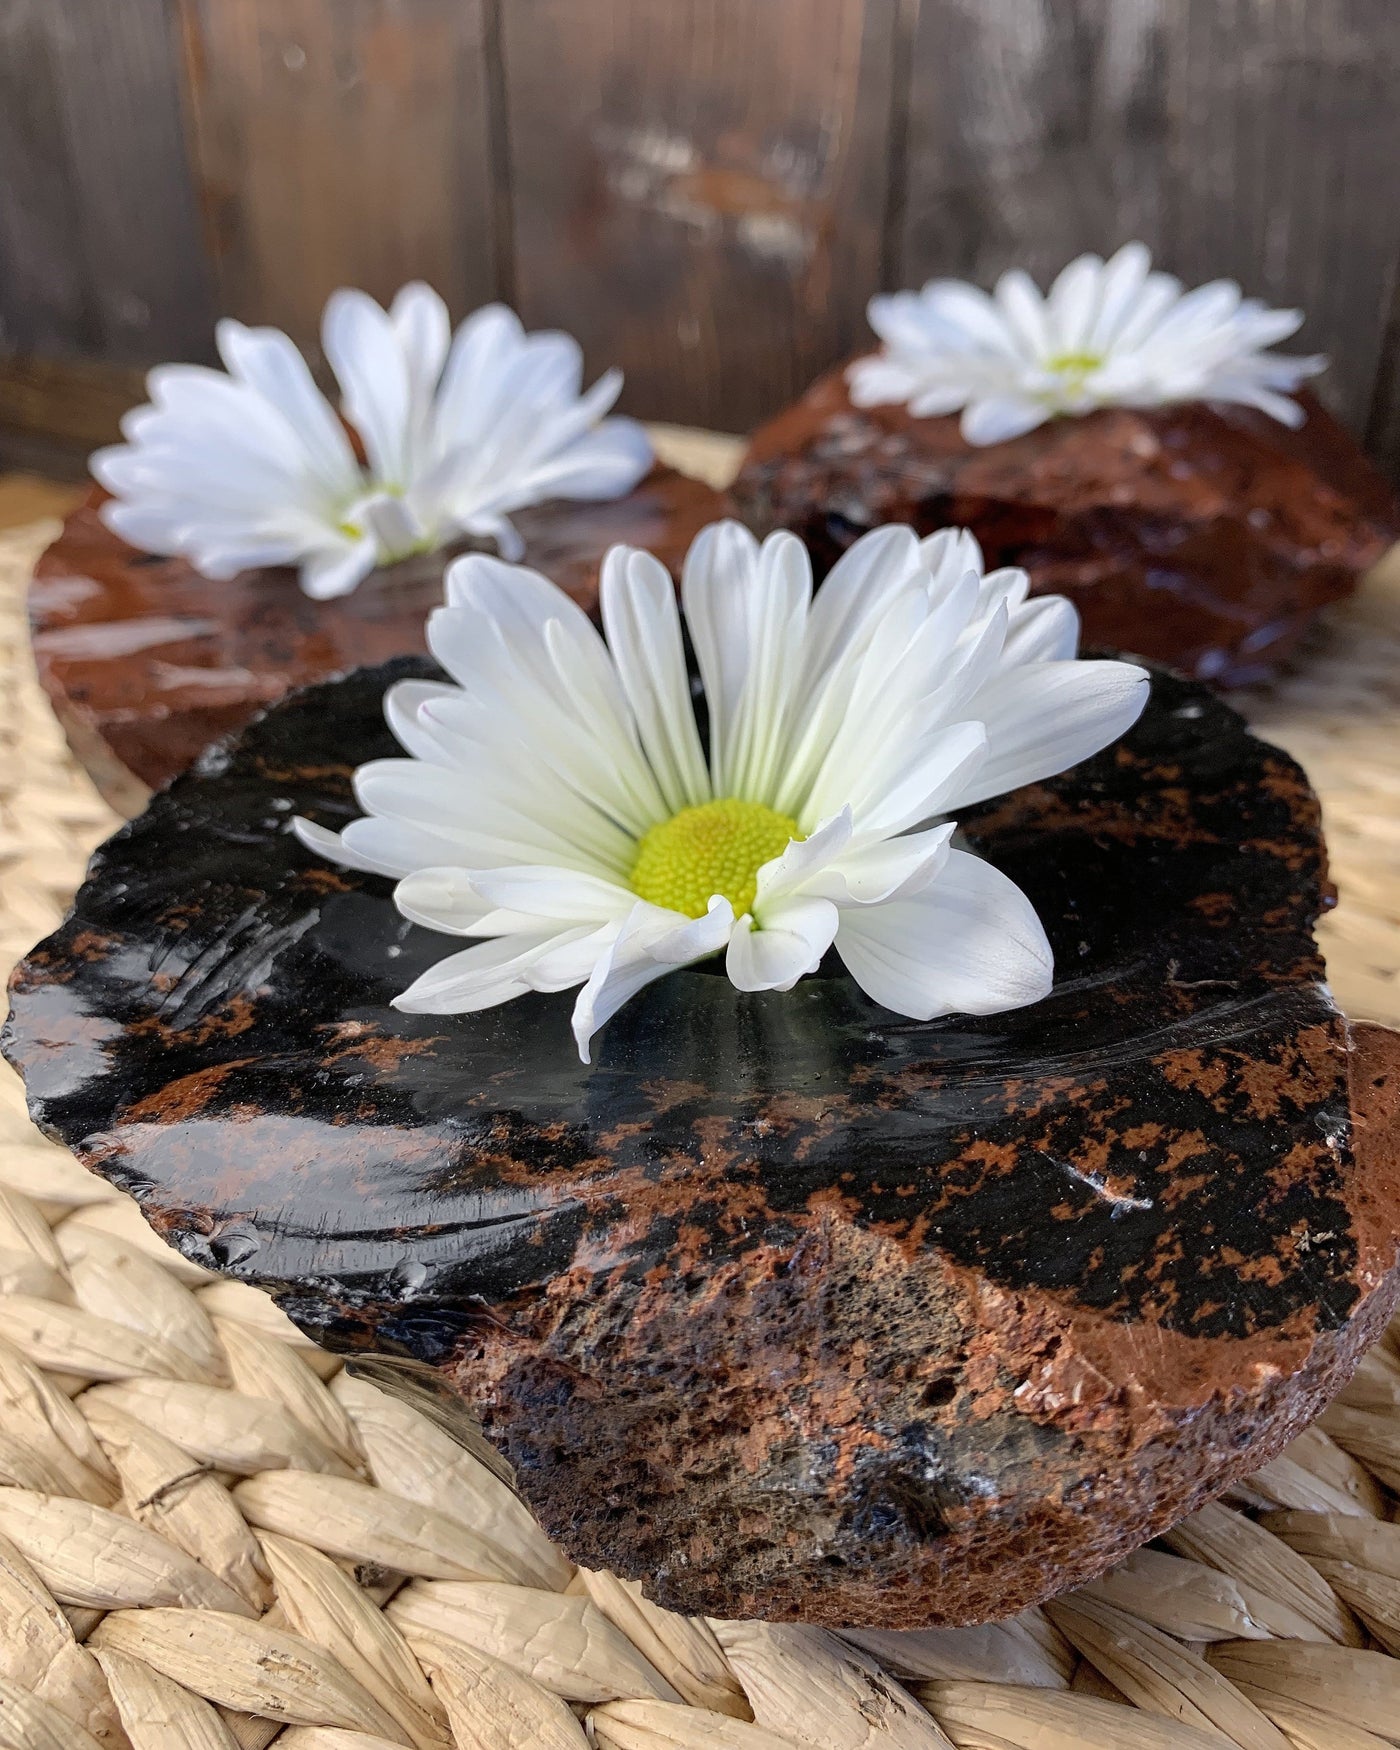 3 coffee obsidian candle holders with daisies sticking out of them